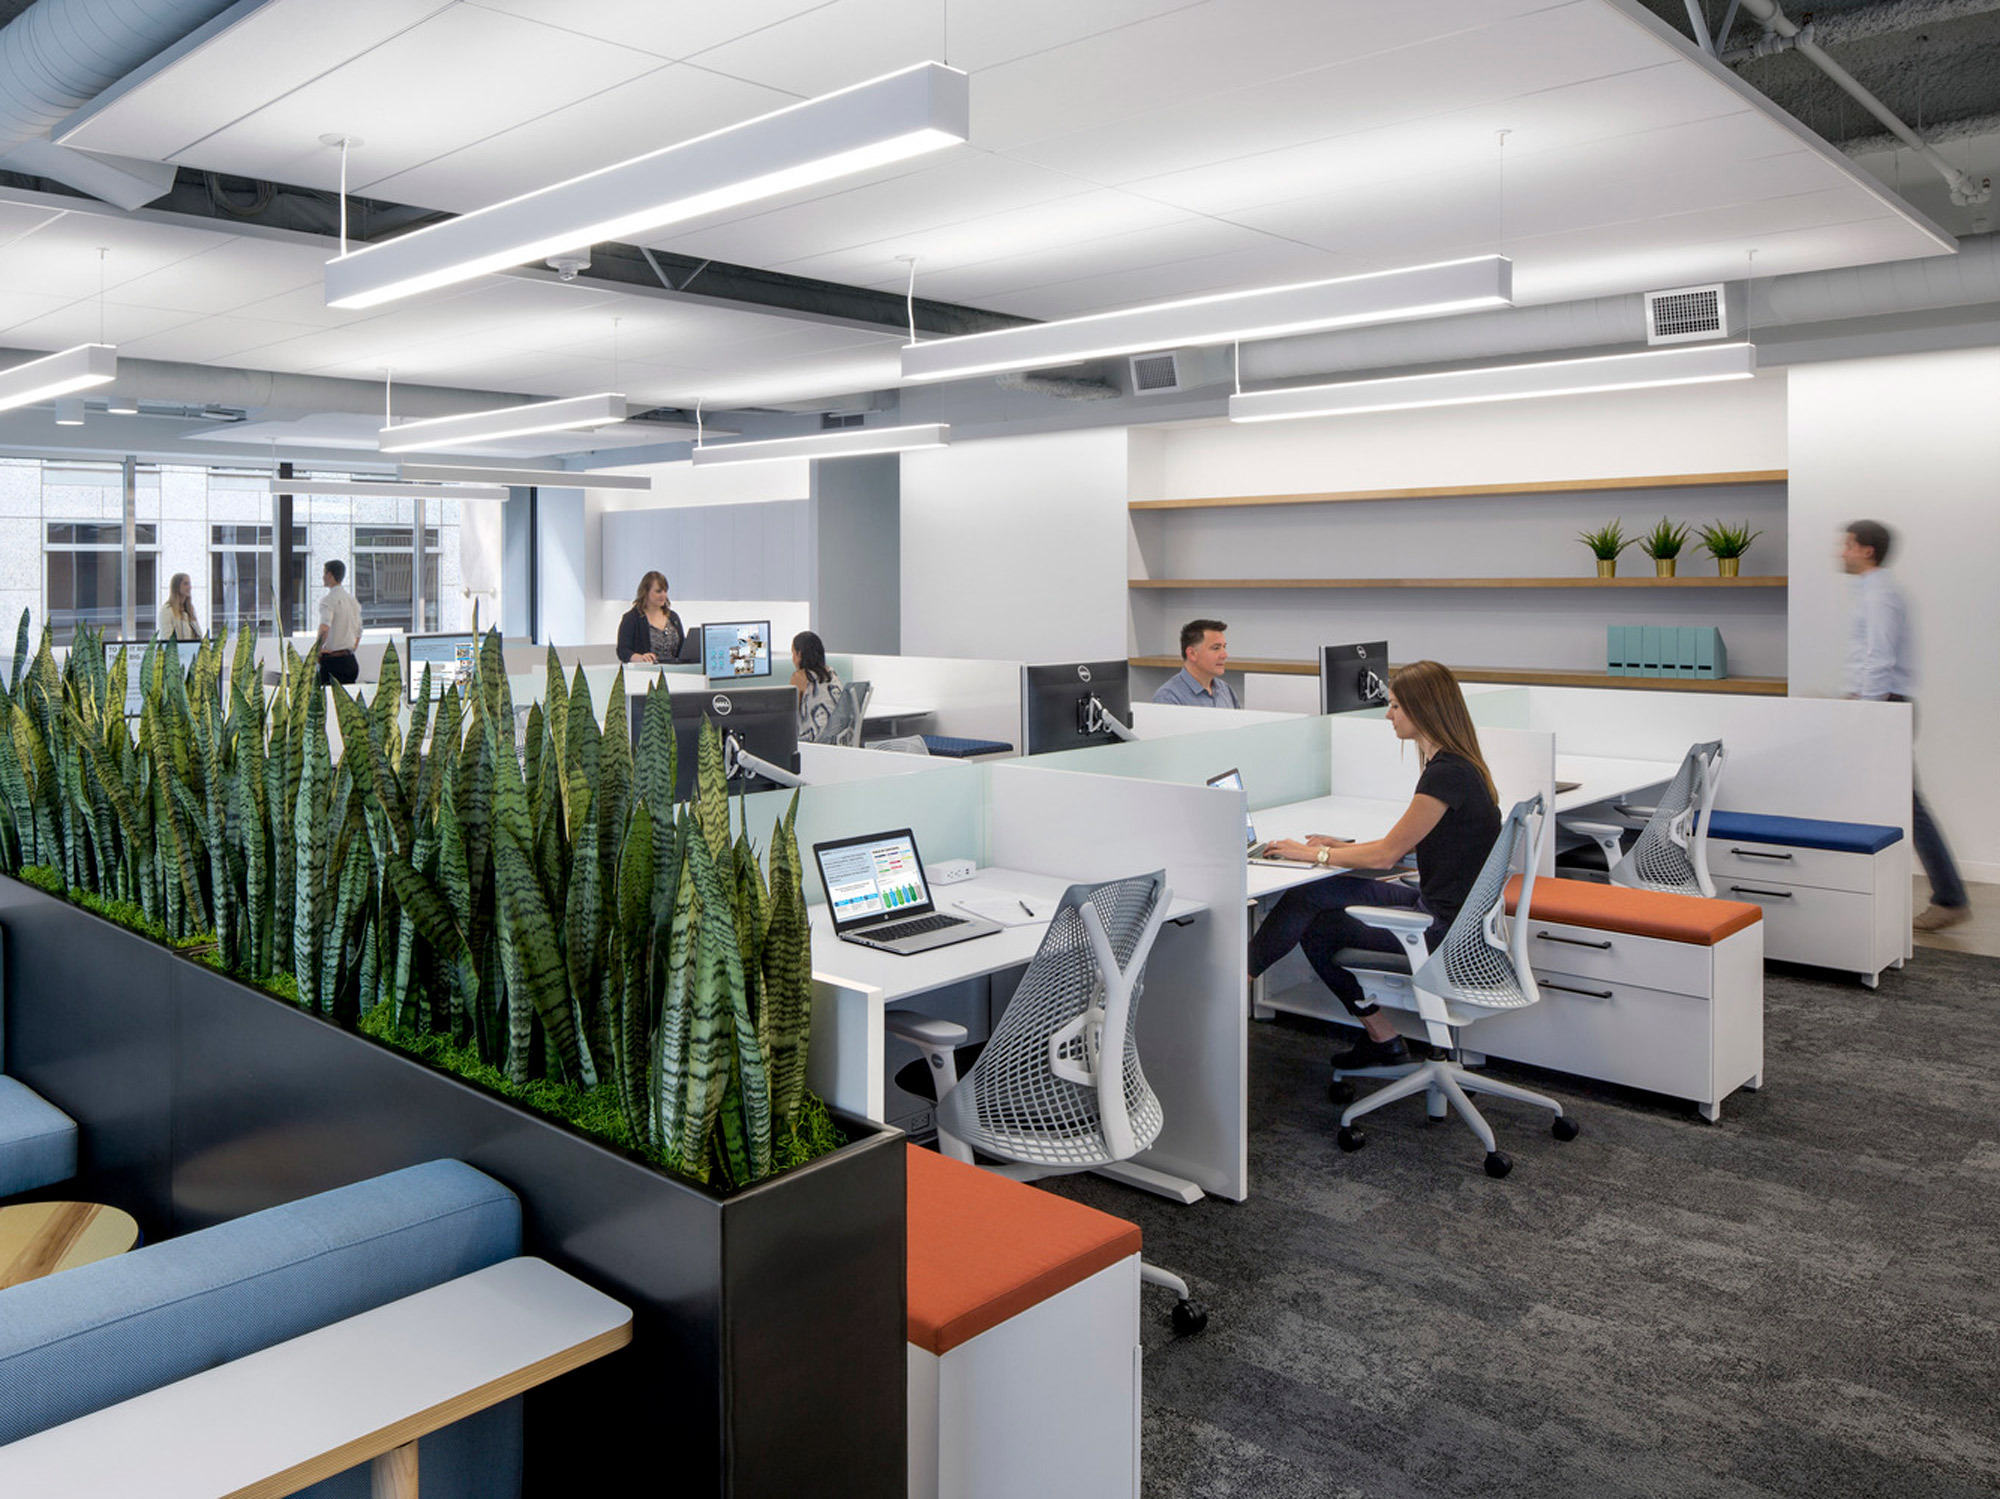 Minimalist office interior featuring open-plan workspaces with ergonomic chairs, white desks, potted green plants creating a natural divider, and sleek, overhead linear lighting. The color palette combines neutral tones with blue and orange accents, fostering a contemporary, collaborative environment.